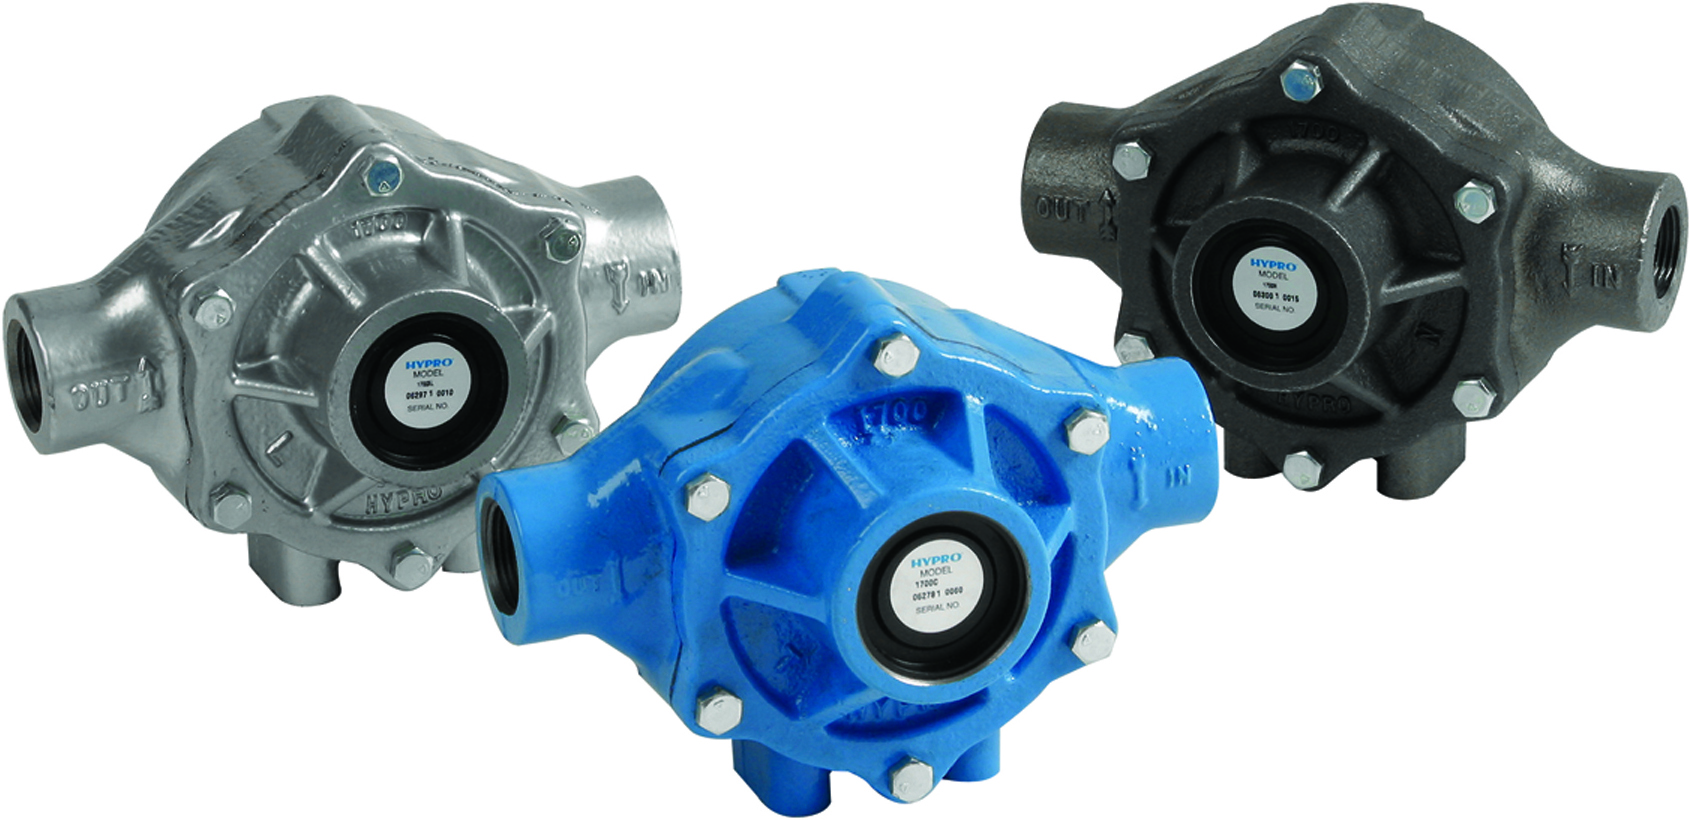 Hypro 1700 Series - 5 Roller, Cast Iron, Ni-Resist or Silver Series XL Roller Pumps